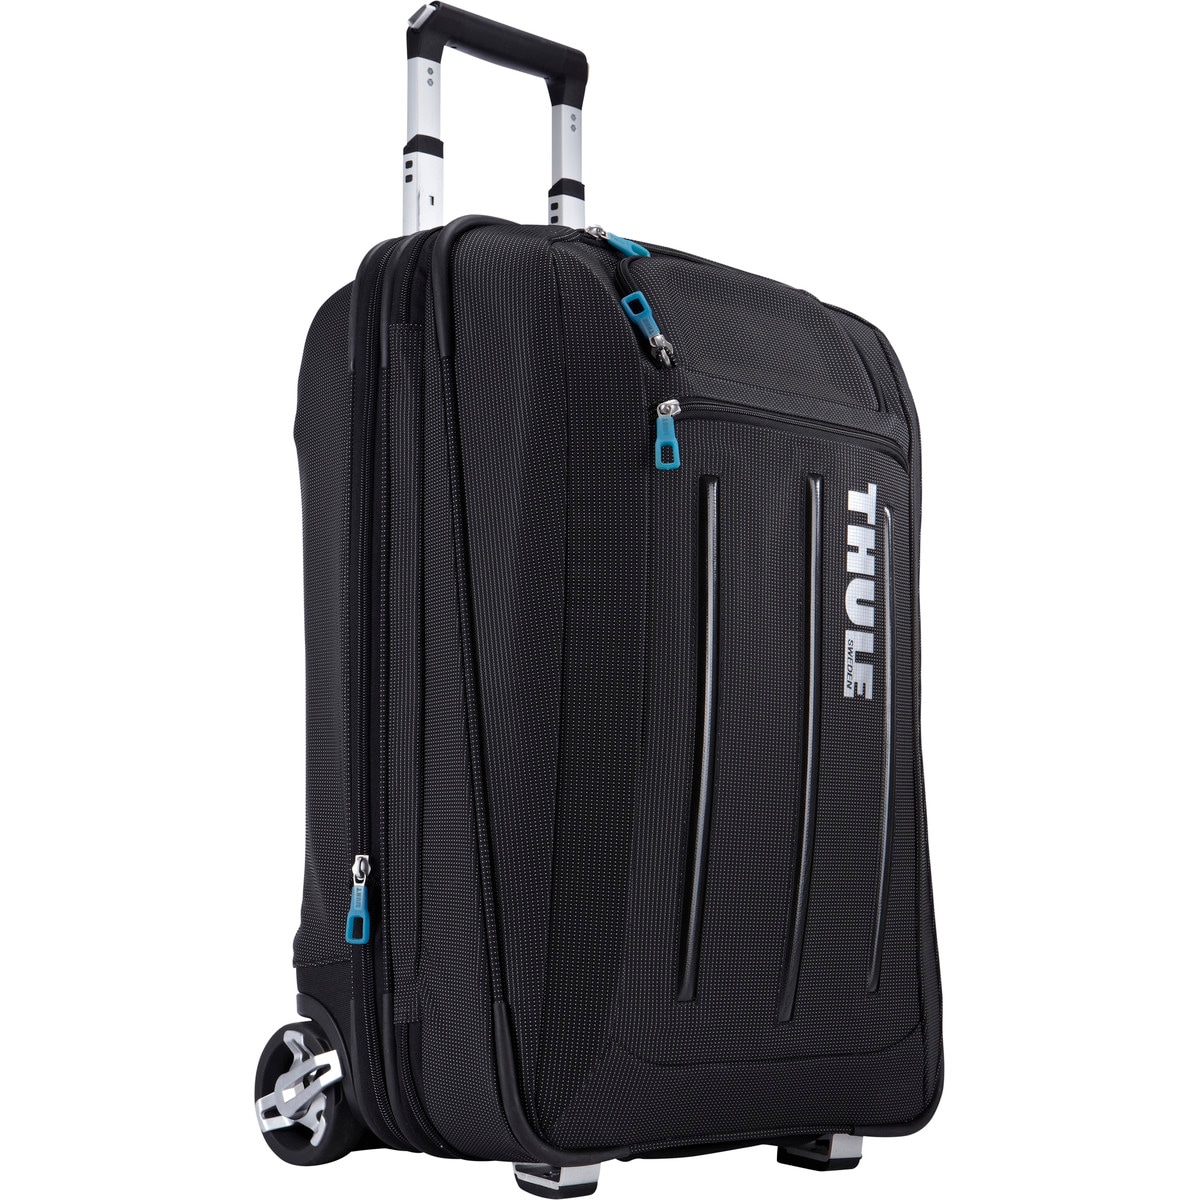 Thule Crossover Upright 22in Rolling Gear Bag